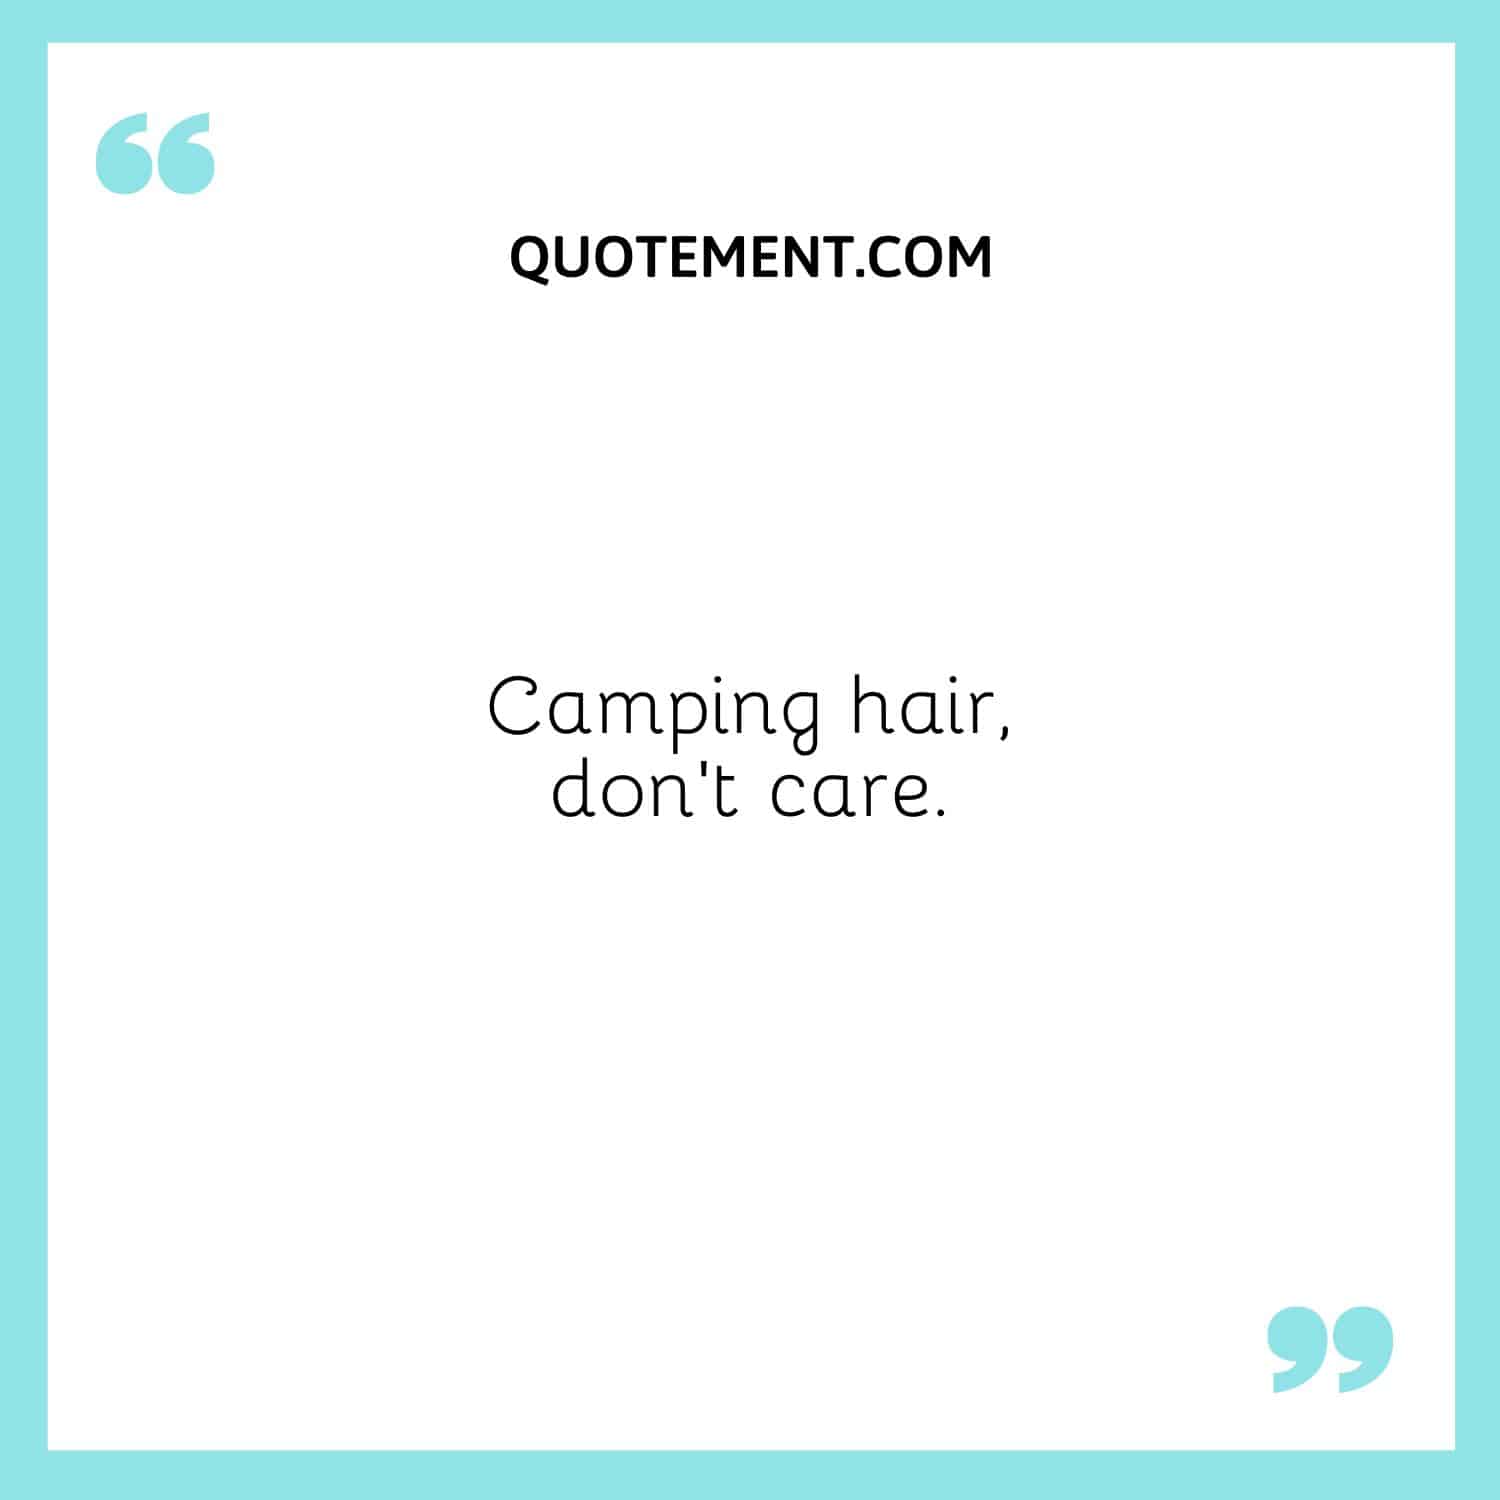 Camping hair, don’t care.